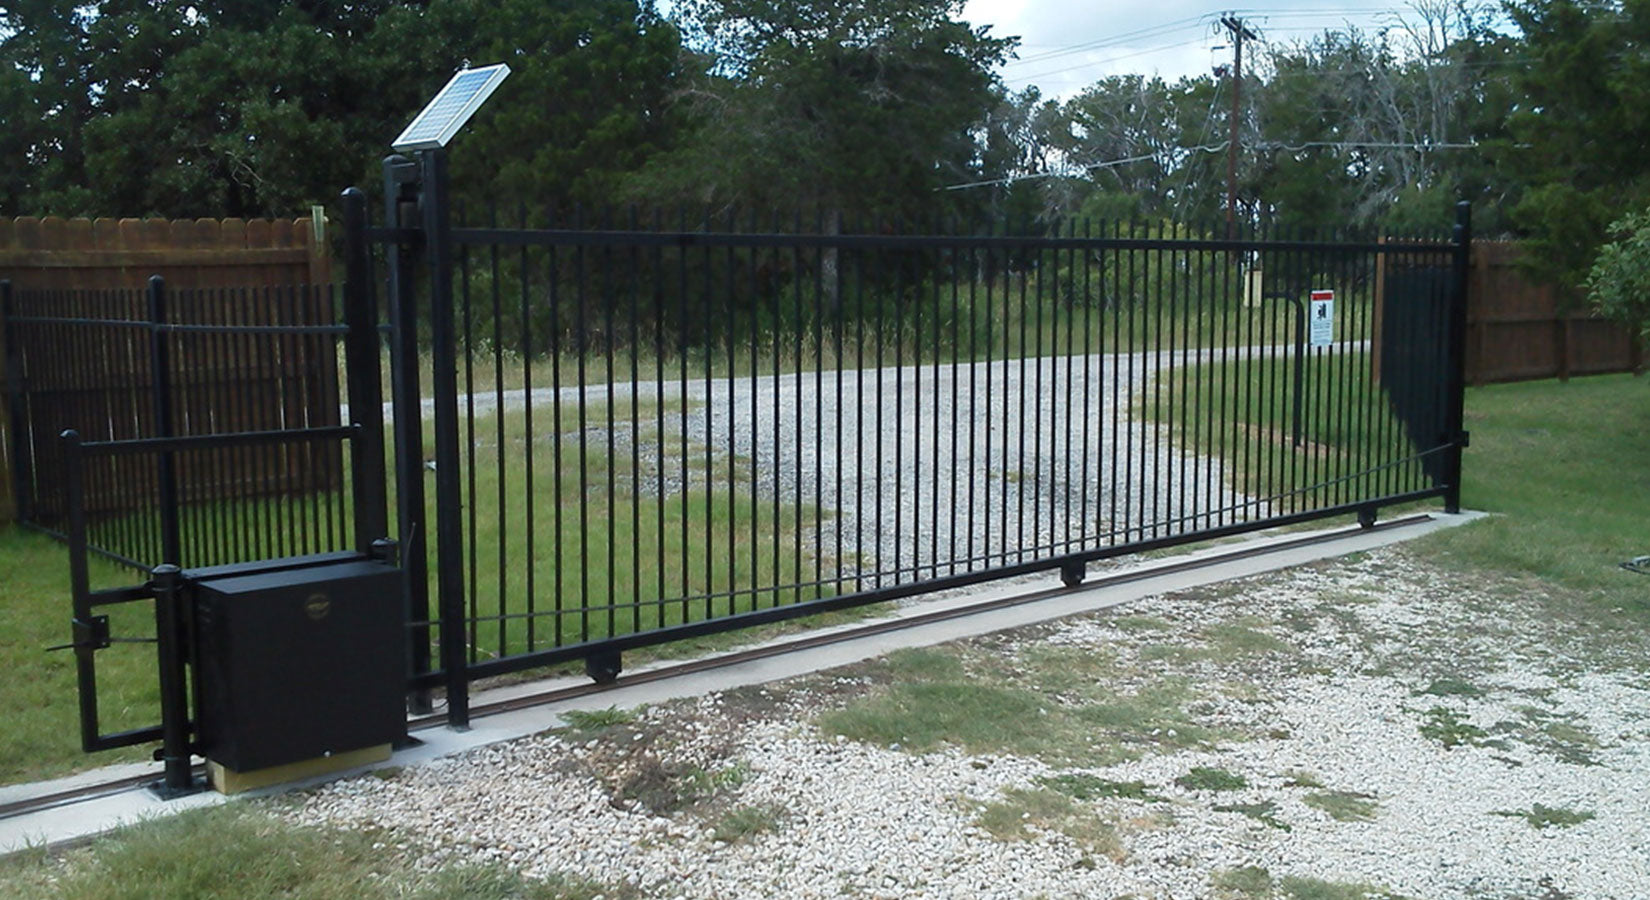 What Is The Benefit Of An Automatic Slide Gate Opener? | All Security Equipment